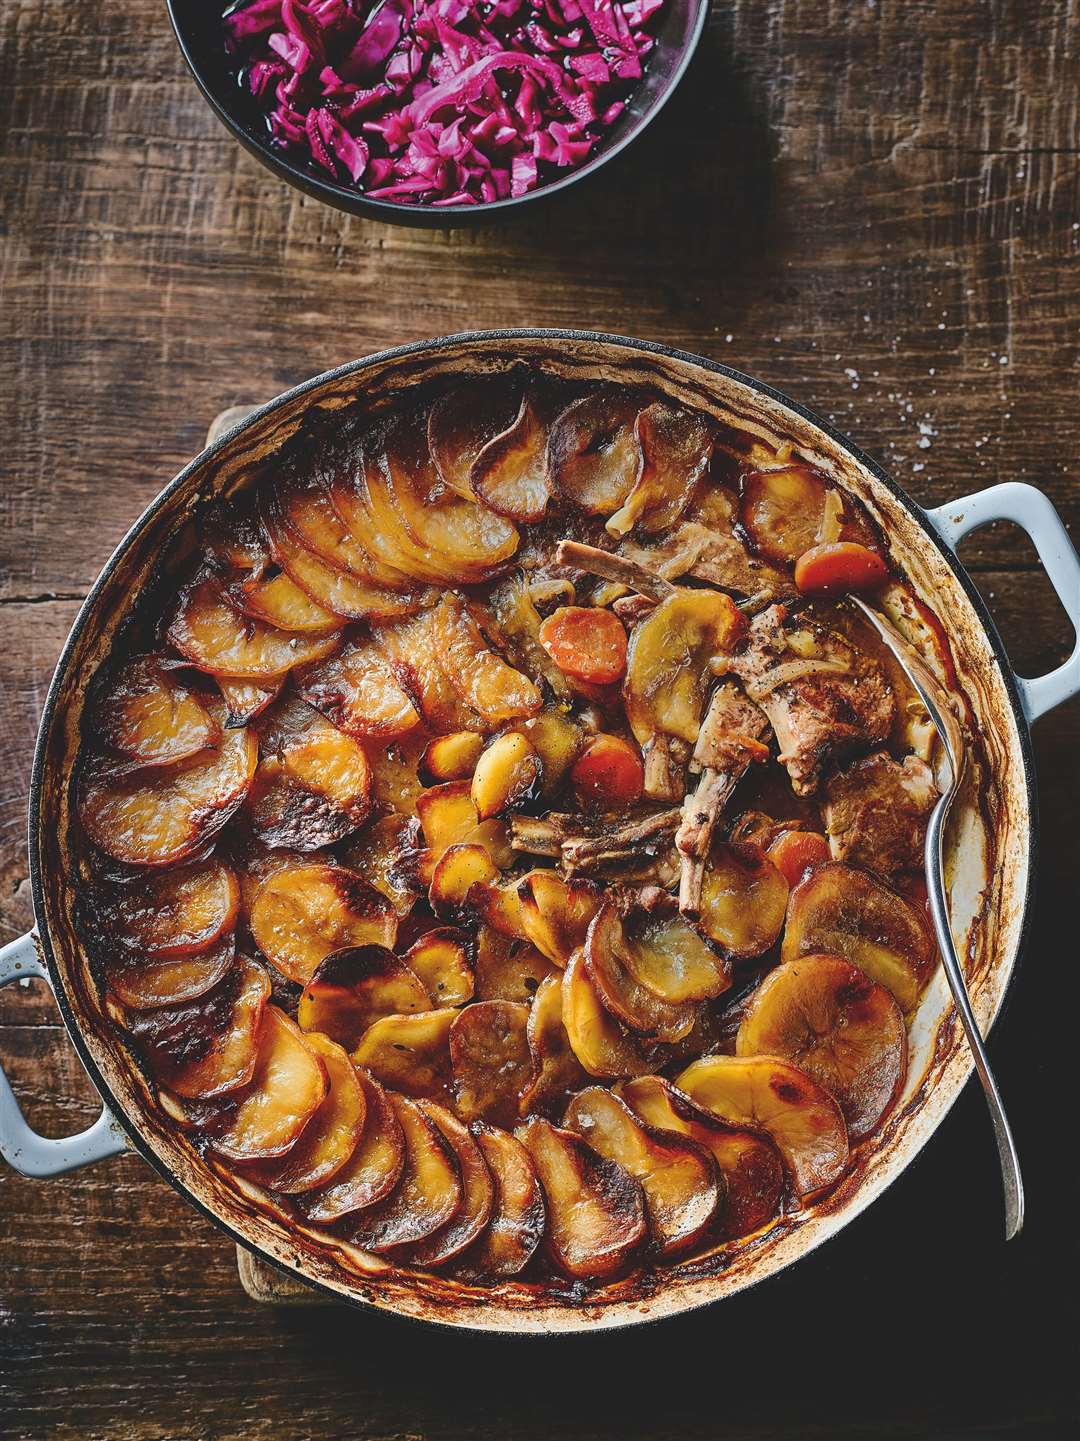 Lancashire hot pot from Oh Cook! by James May. Picture: Pavilion/Martin Poole/PA